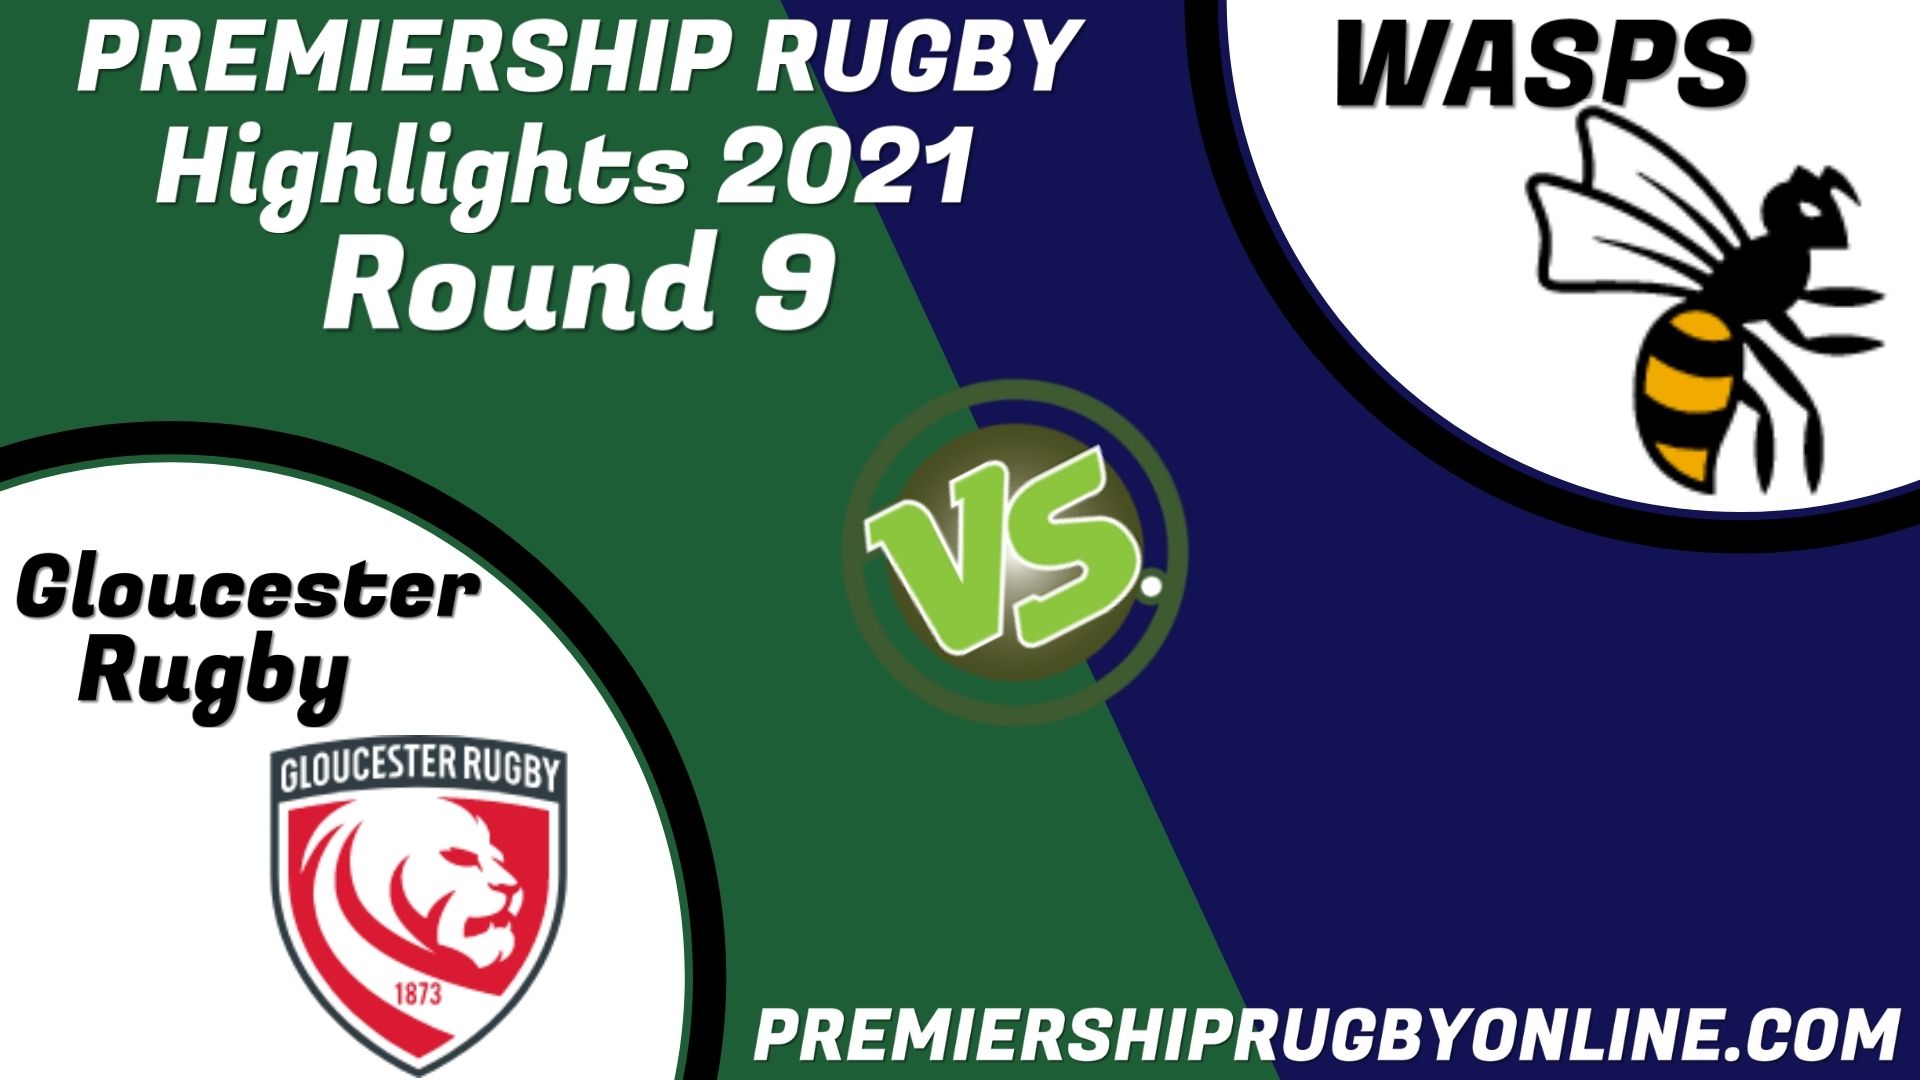 Wasps Vs Gloucester Rugby Highlights 2021 RD 9